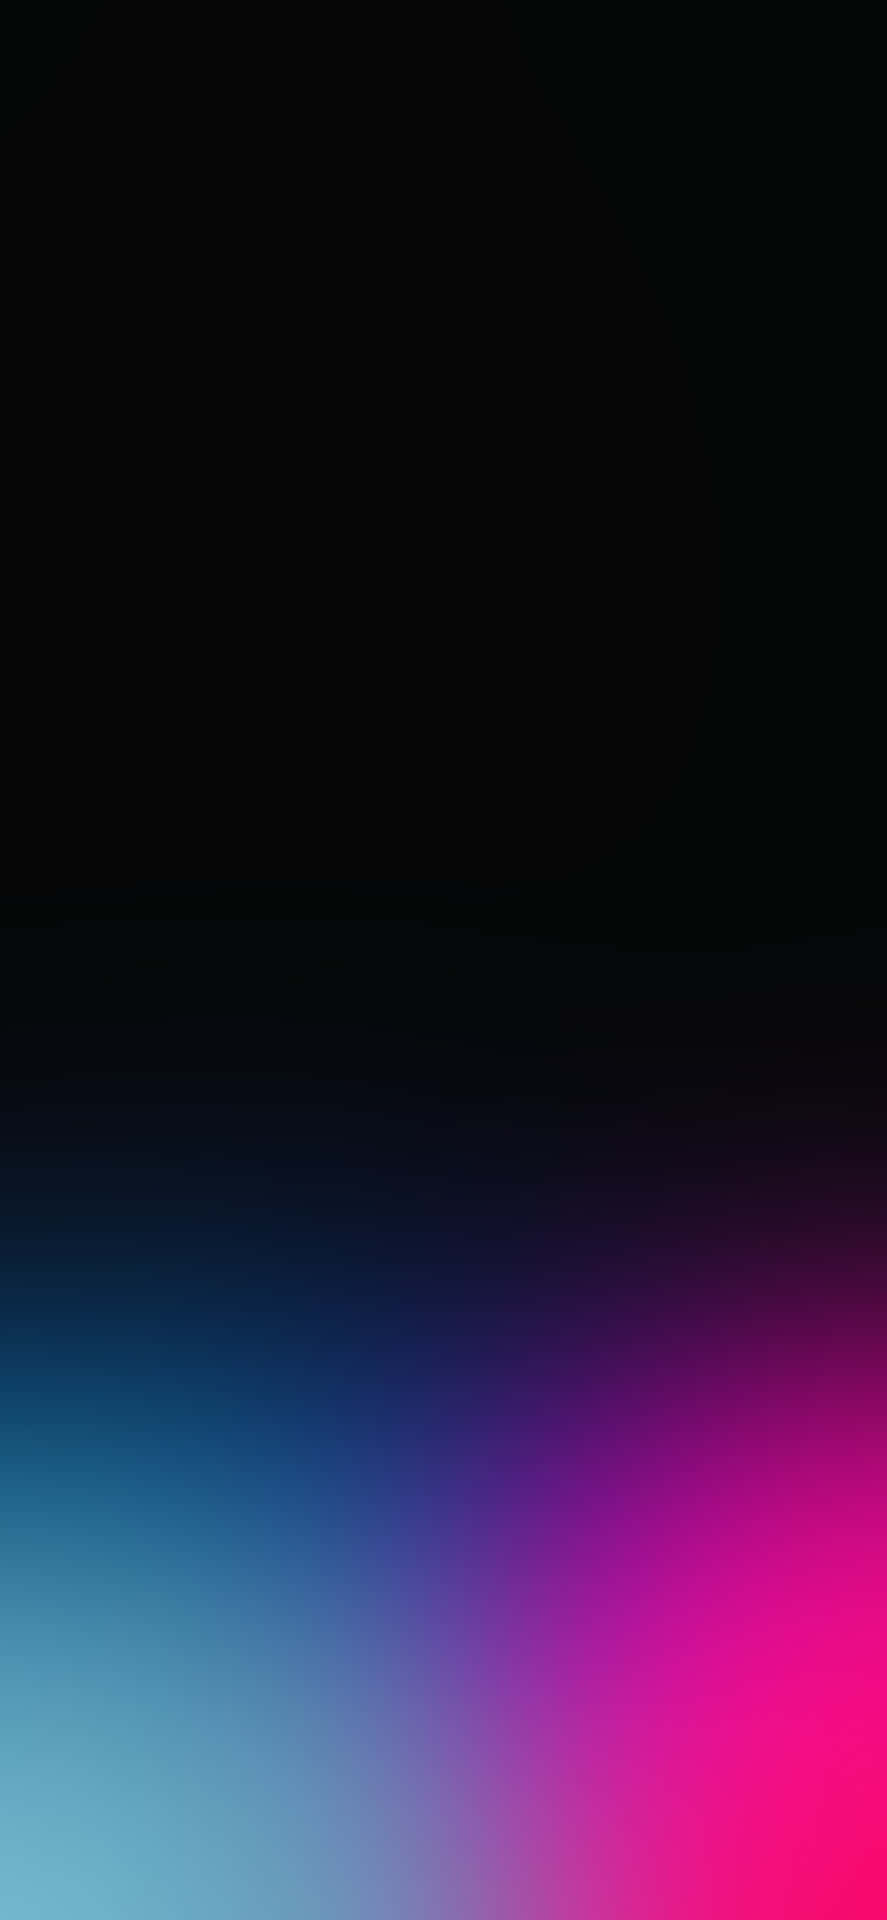 A Black And Pink Background With A Gradient Wallpaper